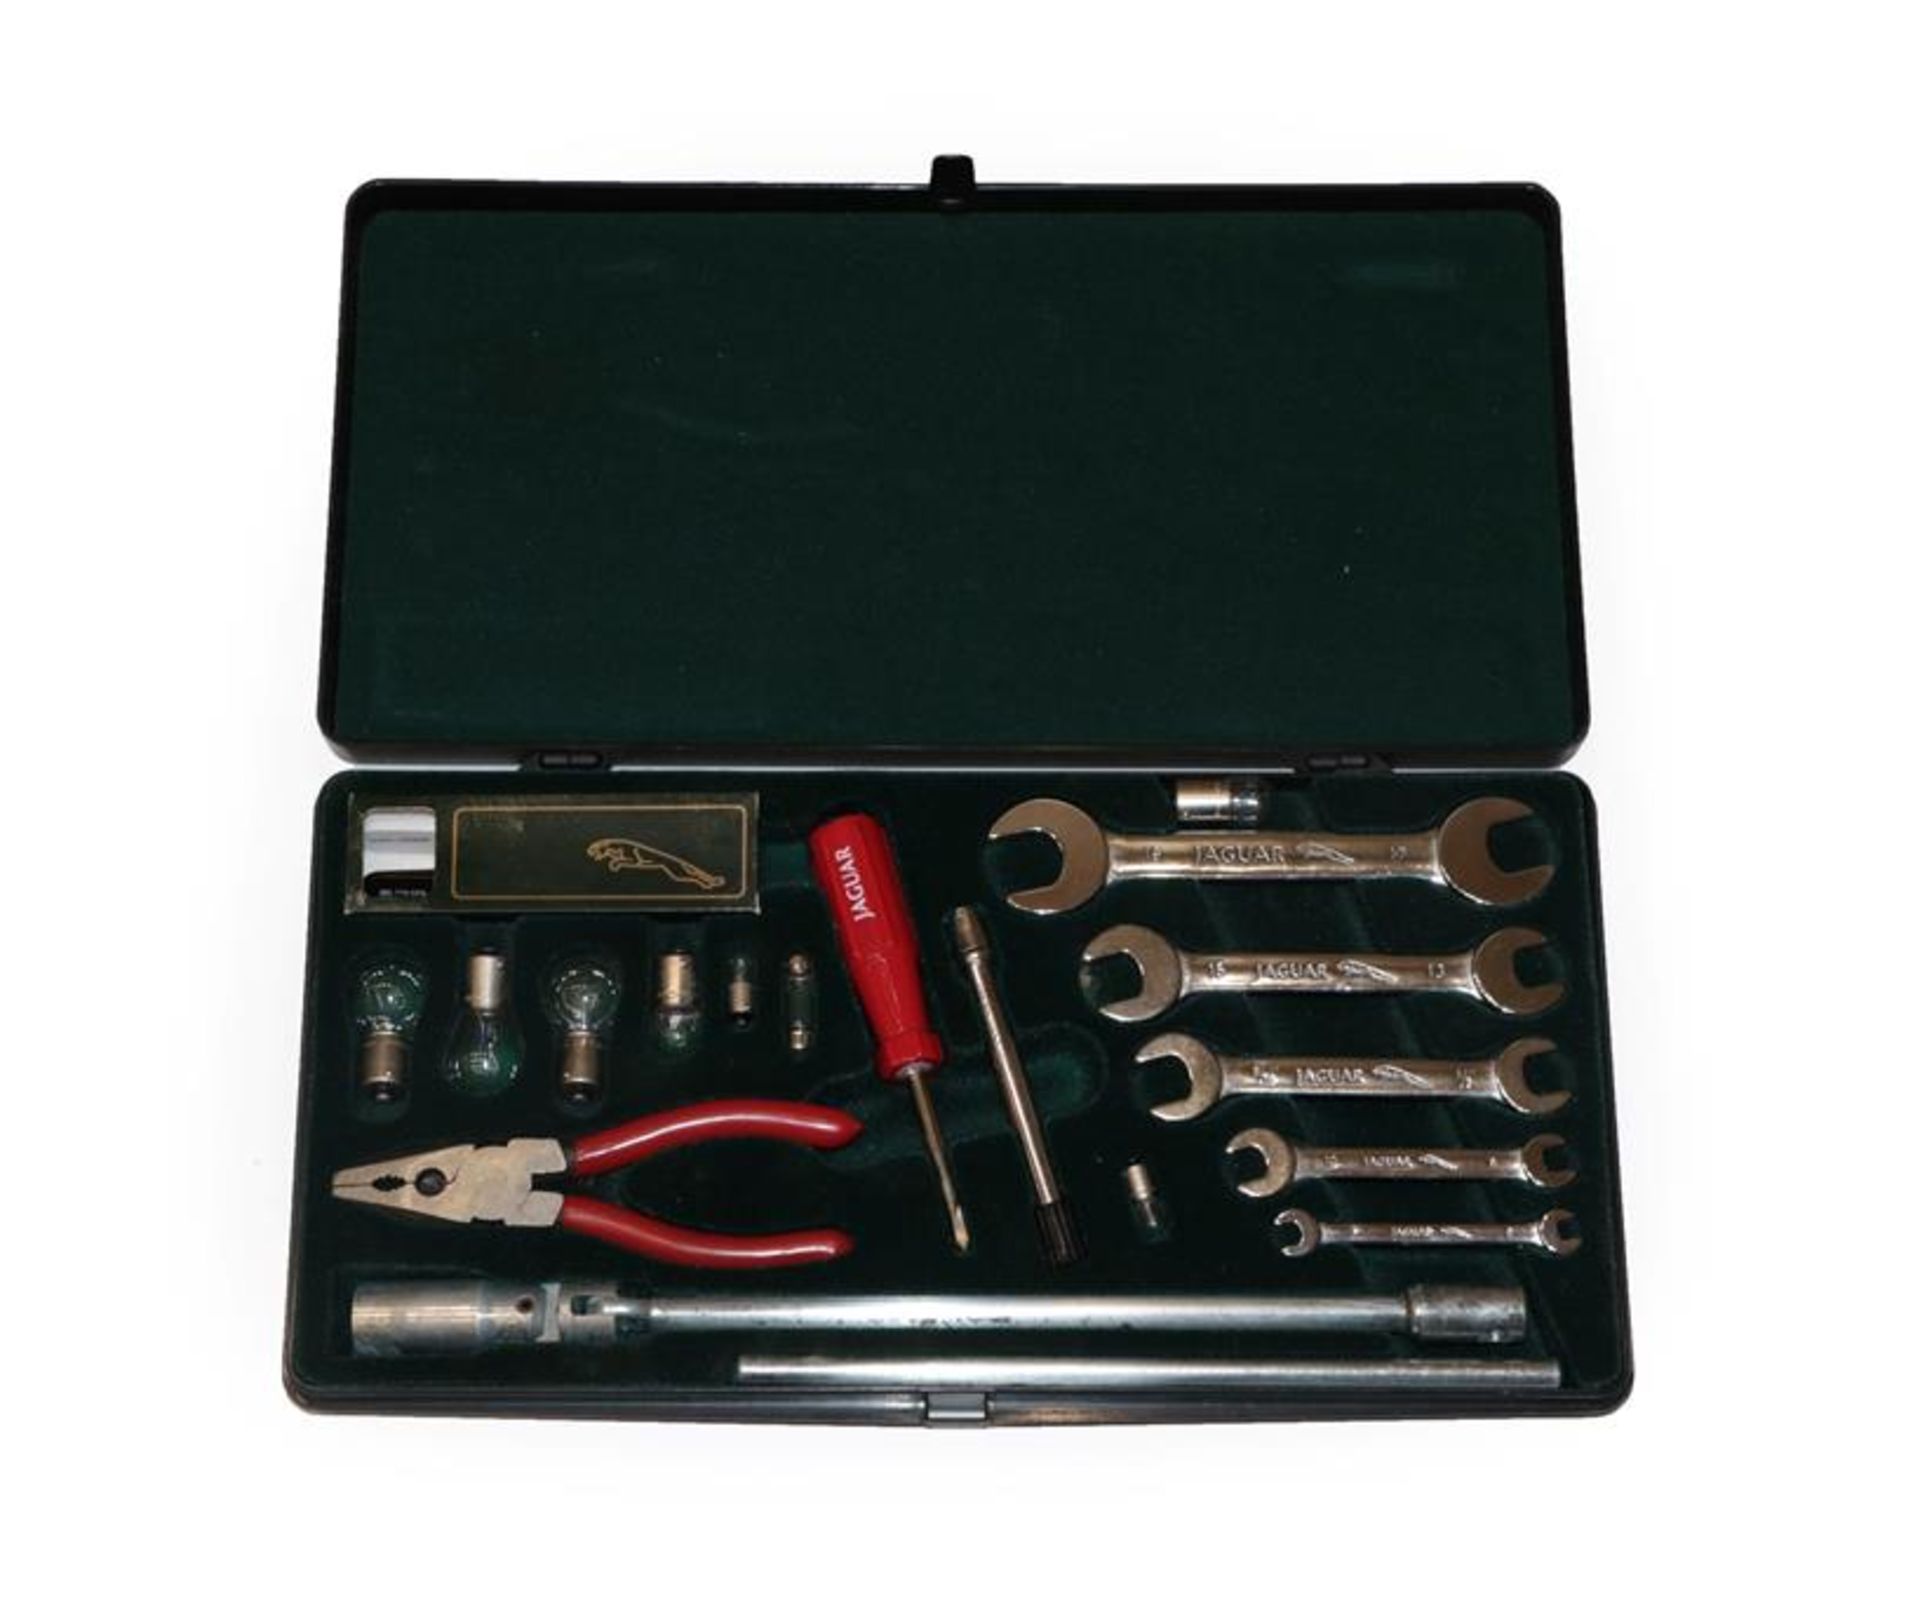 An Original Jaguar XJ Service Kit, contained within a black plastic case, containing five chromed